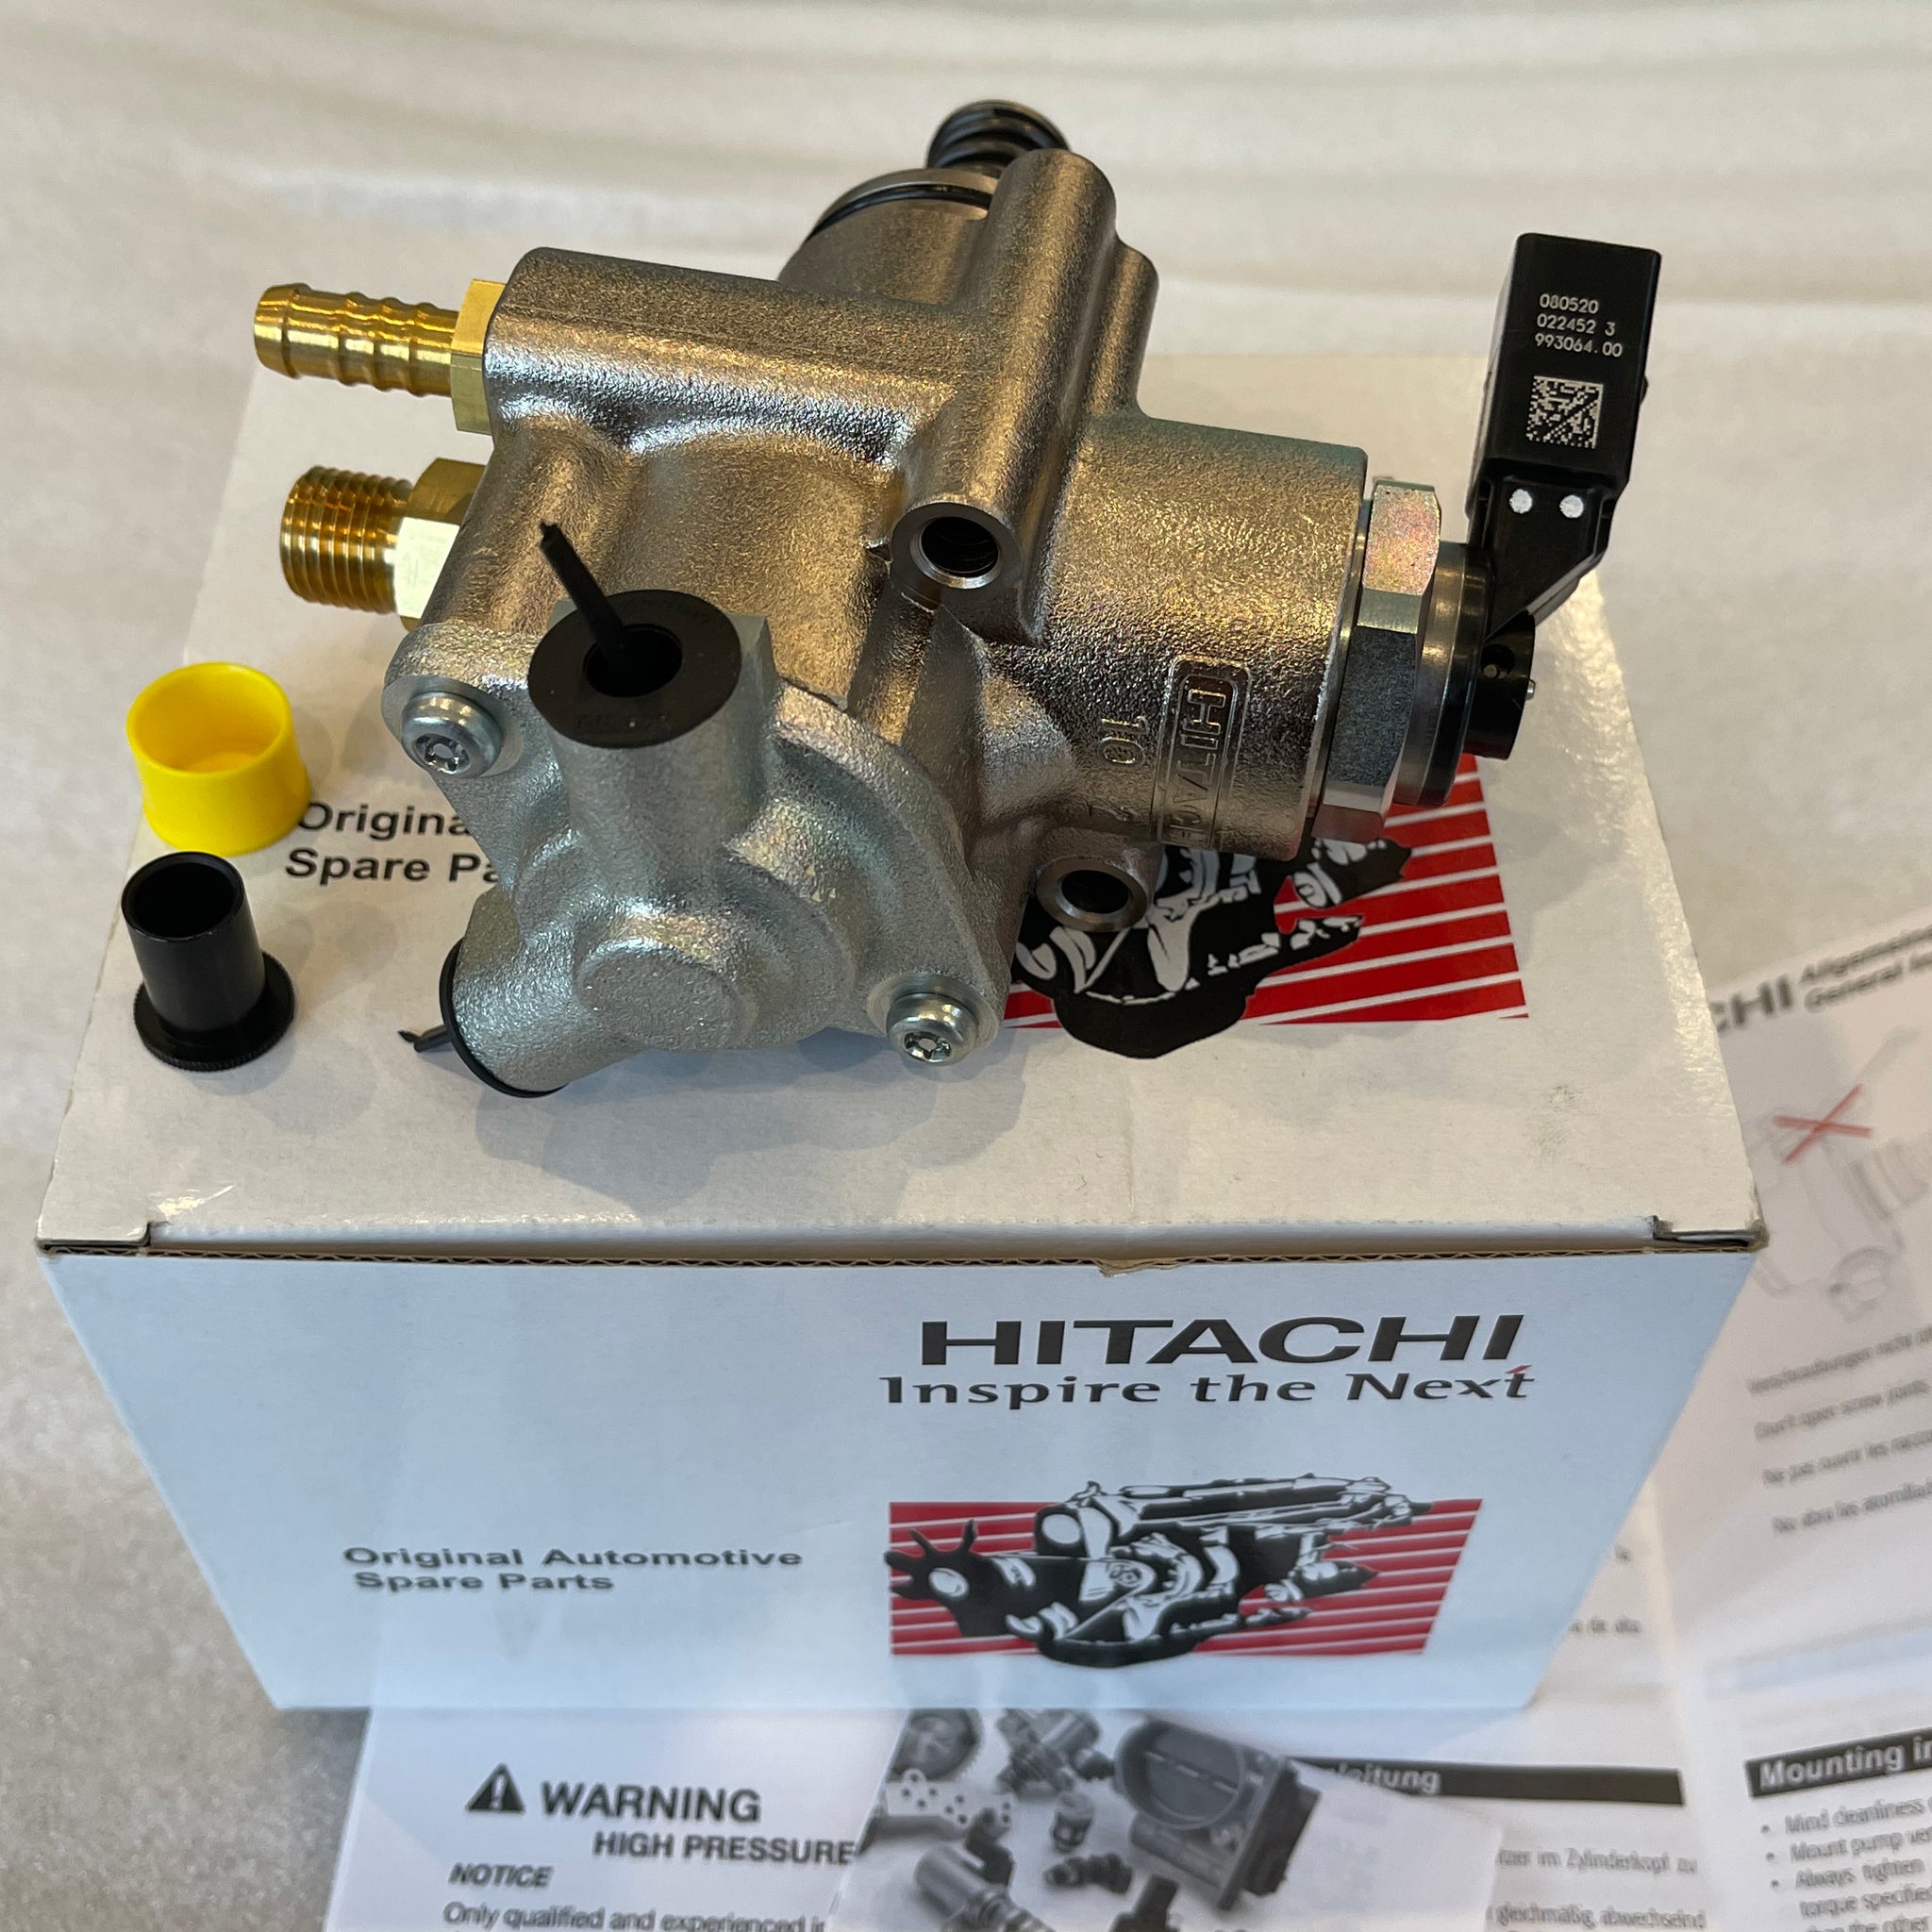 **SPECIAL** 2.0T FSI Hitachi High Pressure Fuel Pump Suitable For VW GOLF GTI Audi with Cam Follower For VW GOLF 5 MK5 GTI 2005 - 2009 HPFP VW GOLF GTI Audi 2.0T FSI Hitachi High Pressure Fuel Pump with Cam Follower For VW GOLF 5 MK5 GTI 2005 - 2009 HPFP 06F 127 025 H 06F127025J 06F127025 J K L M Vw golf gti mk5 Golf gti hpfp Golf 5 gti VW / AUDI 2.0 T EA113 vw golf mk5 gti Audi A3 2.0T high pressure fuel pump 